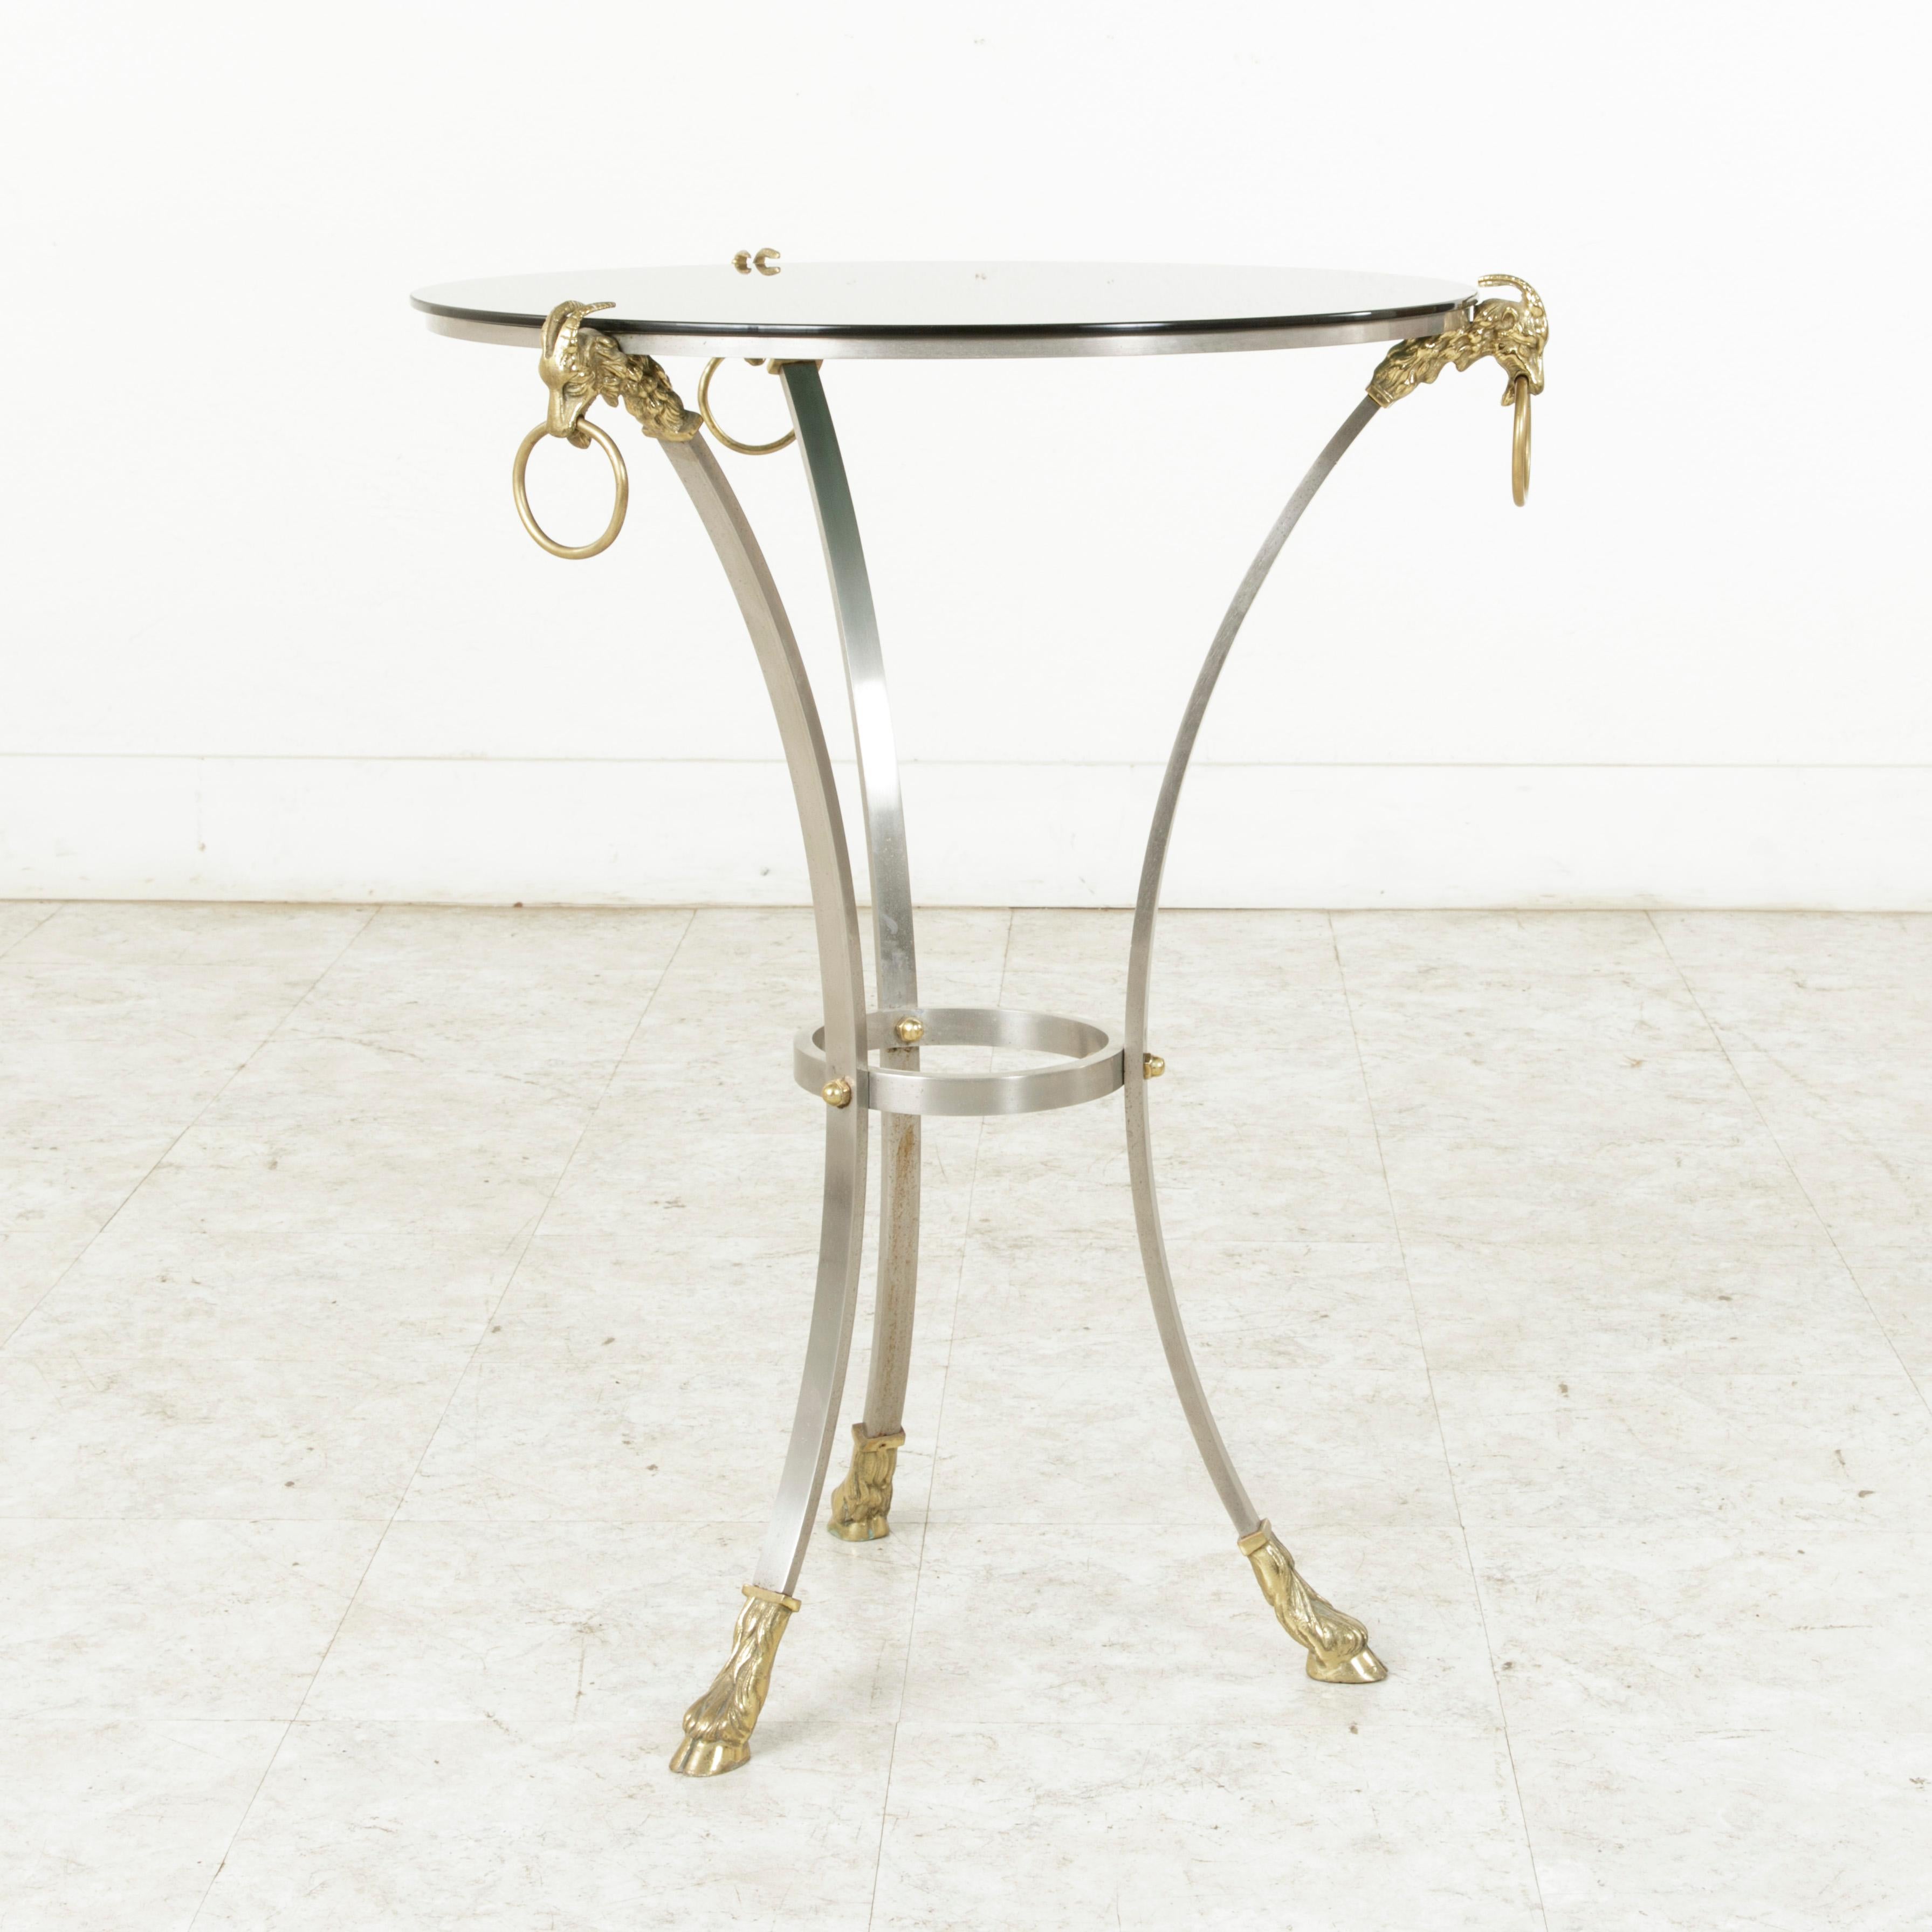 Midcentury French Maison Charles Brass and Steel Gueridon Side Table Rams Heads (20. Jahrhundert)